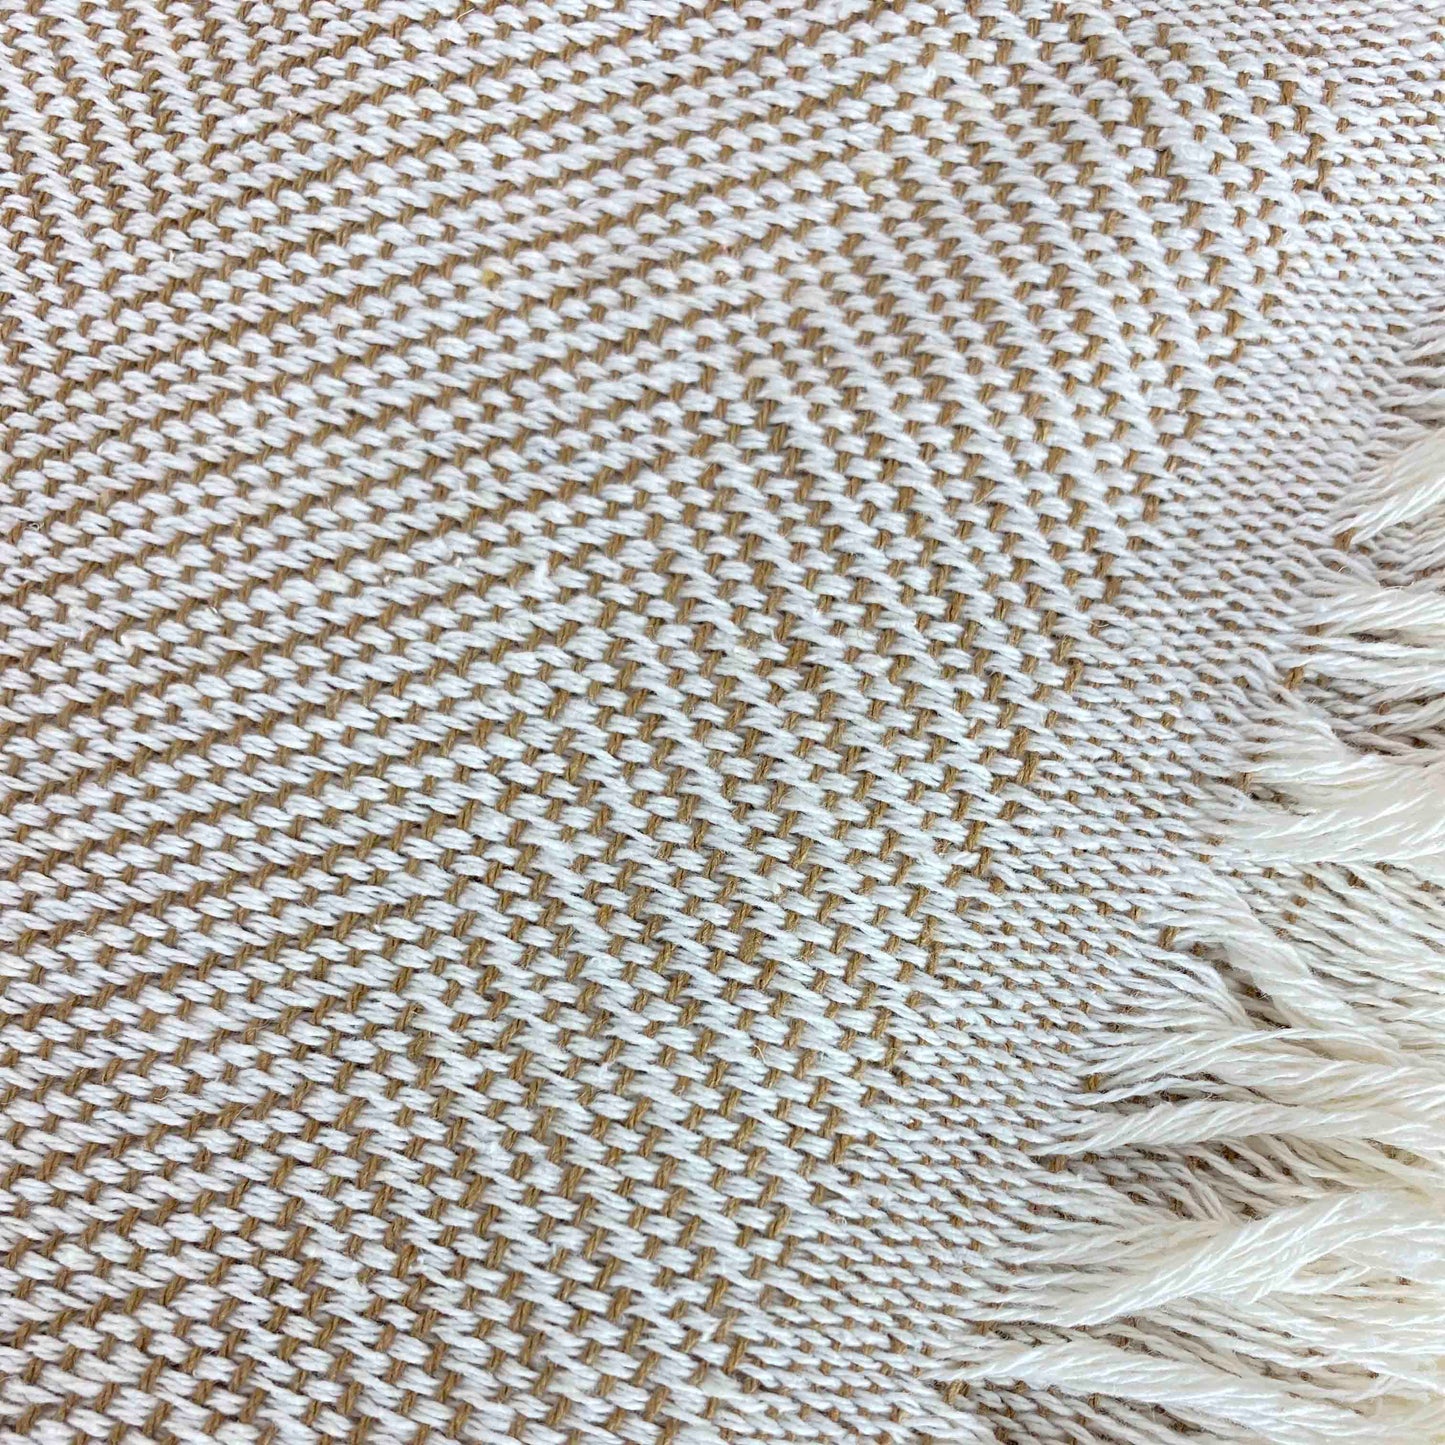 Multipurpose bedspread for sofa or bed with fringes. Beige and Ecru color.